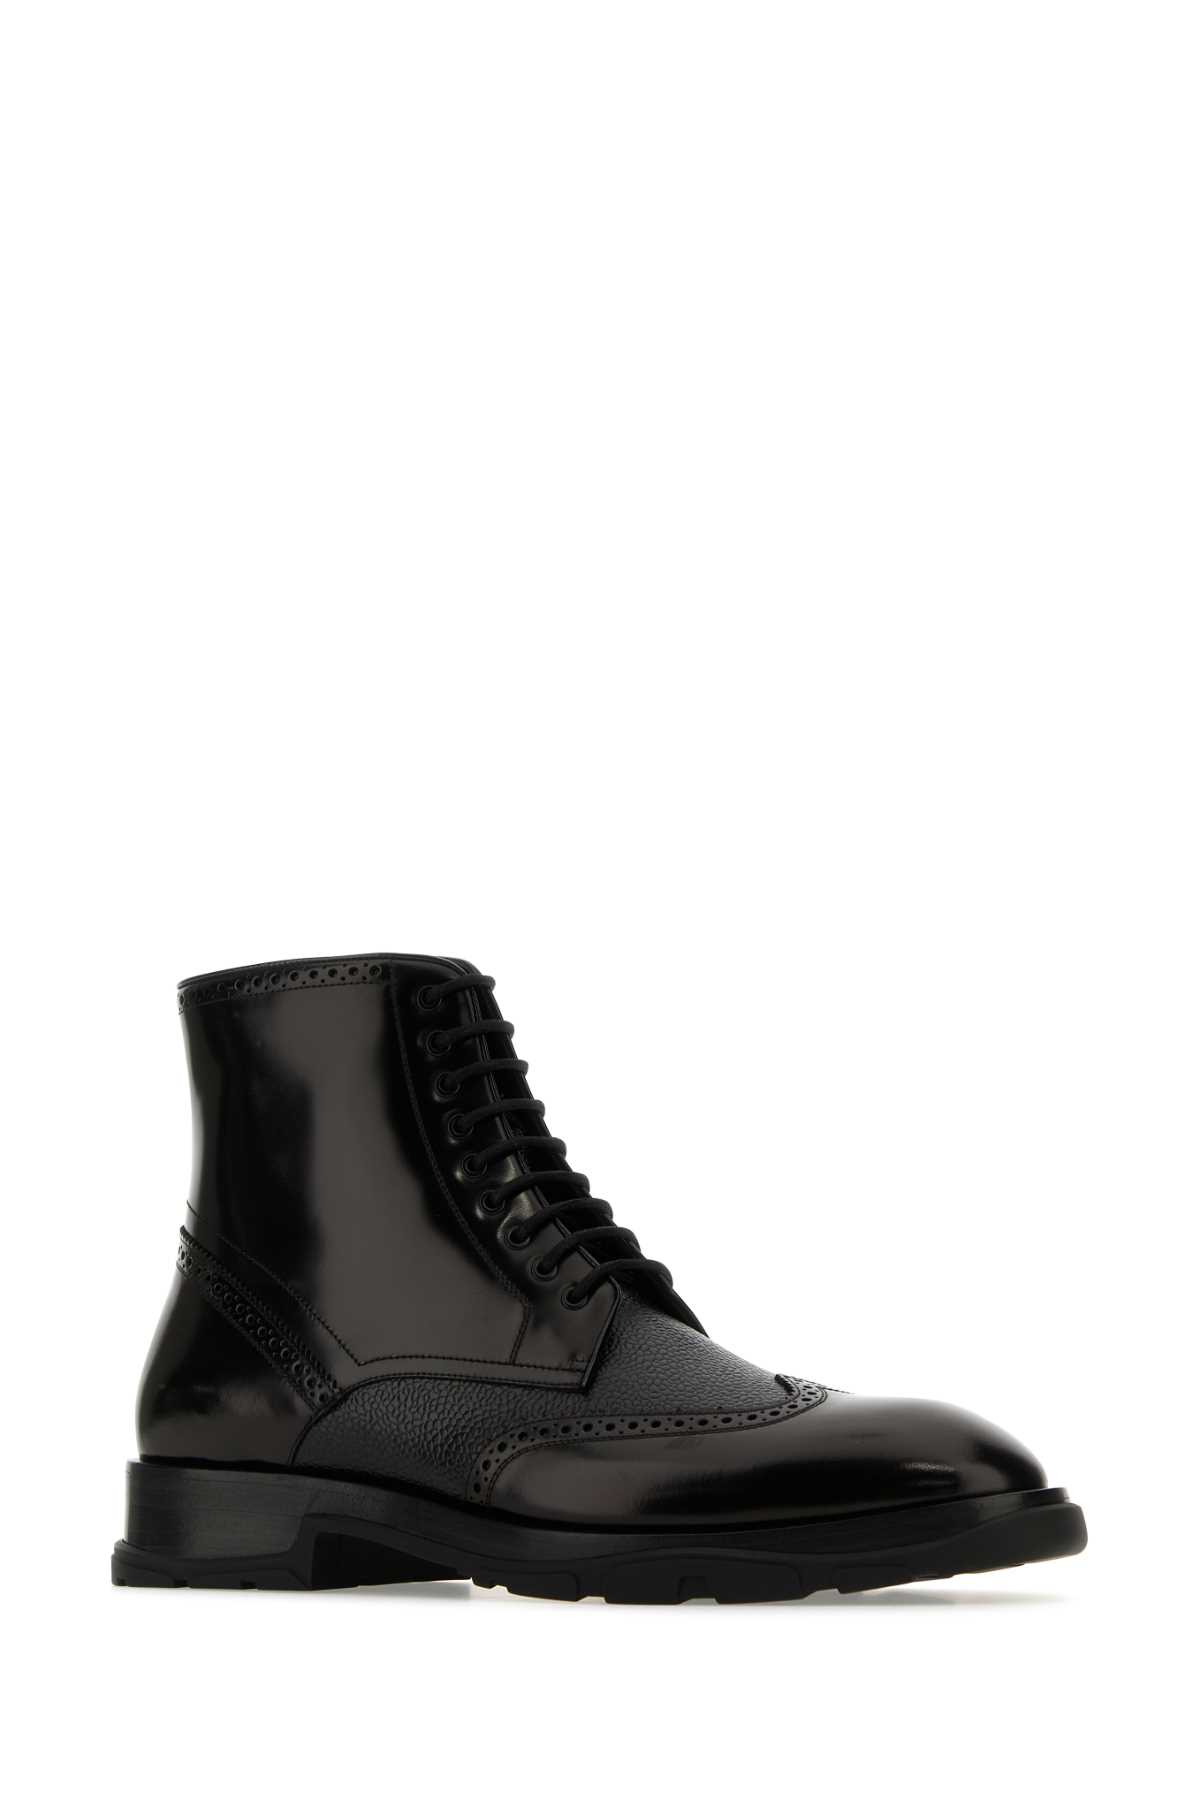 ALEXANDER MCQUEEN BLACK LEATHER ANKLE BOOTS